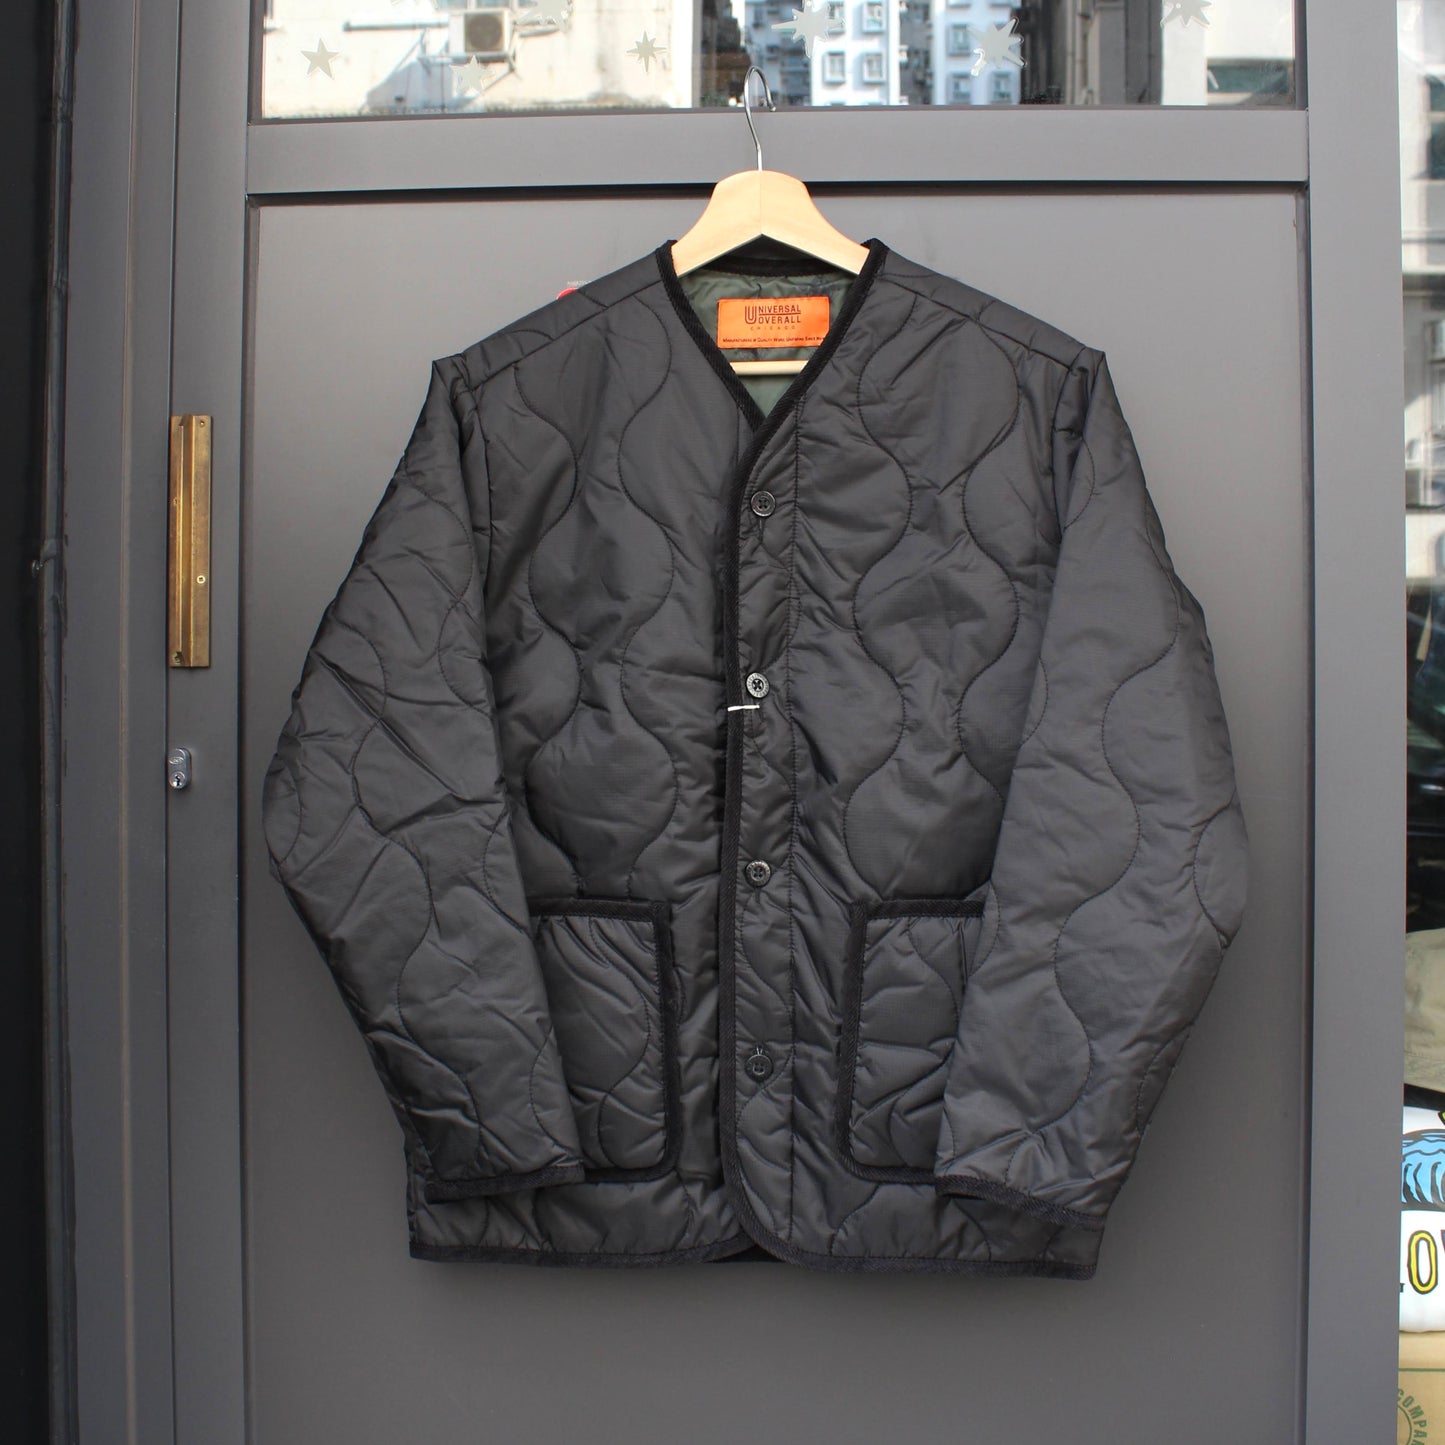 UNIVERSAL OVERALL JAPAN - 
QUILT JACKET